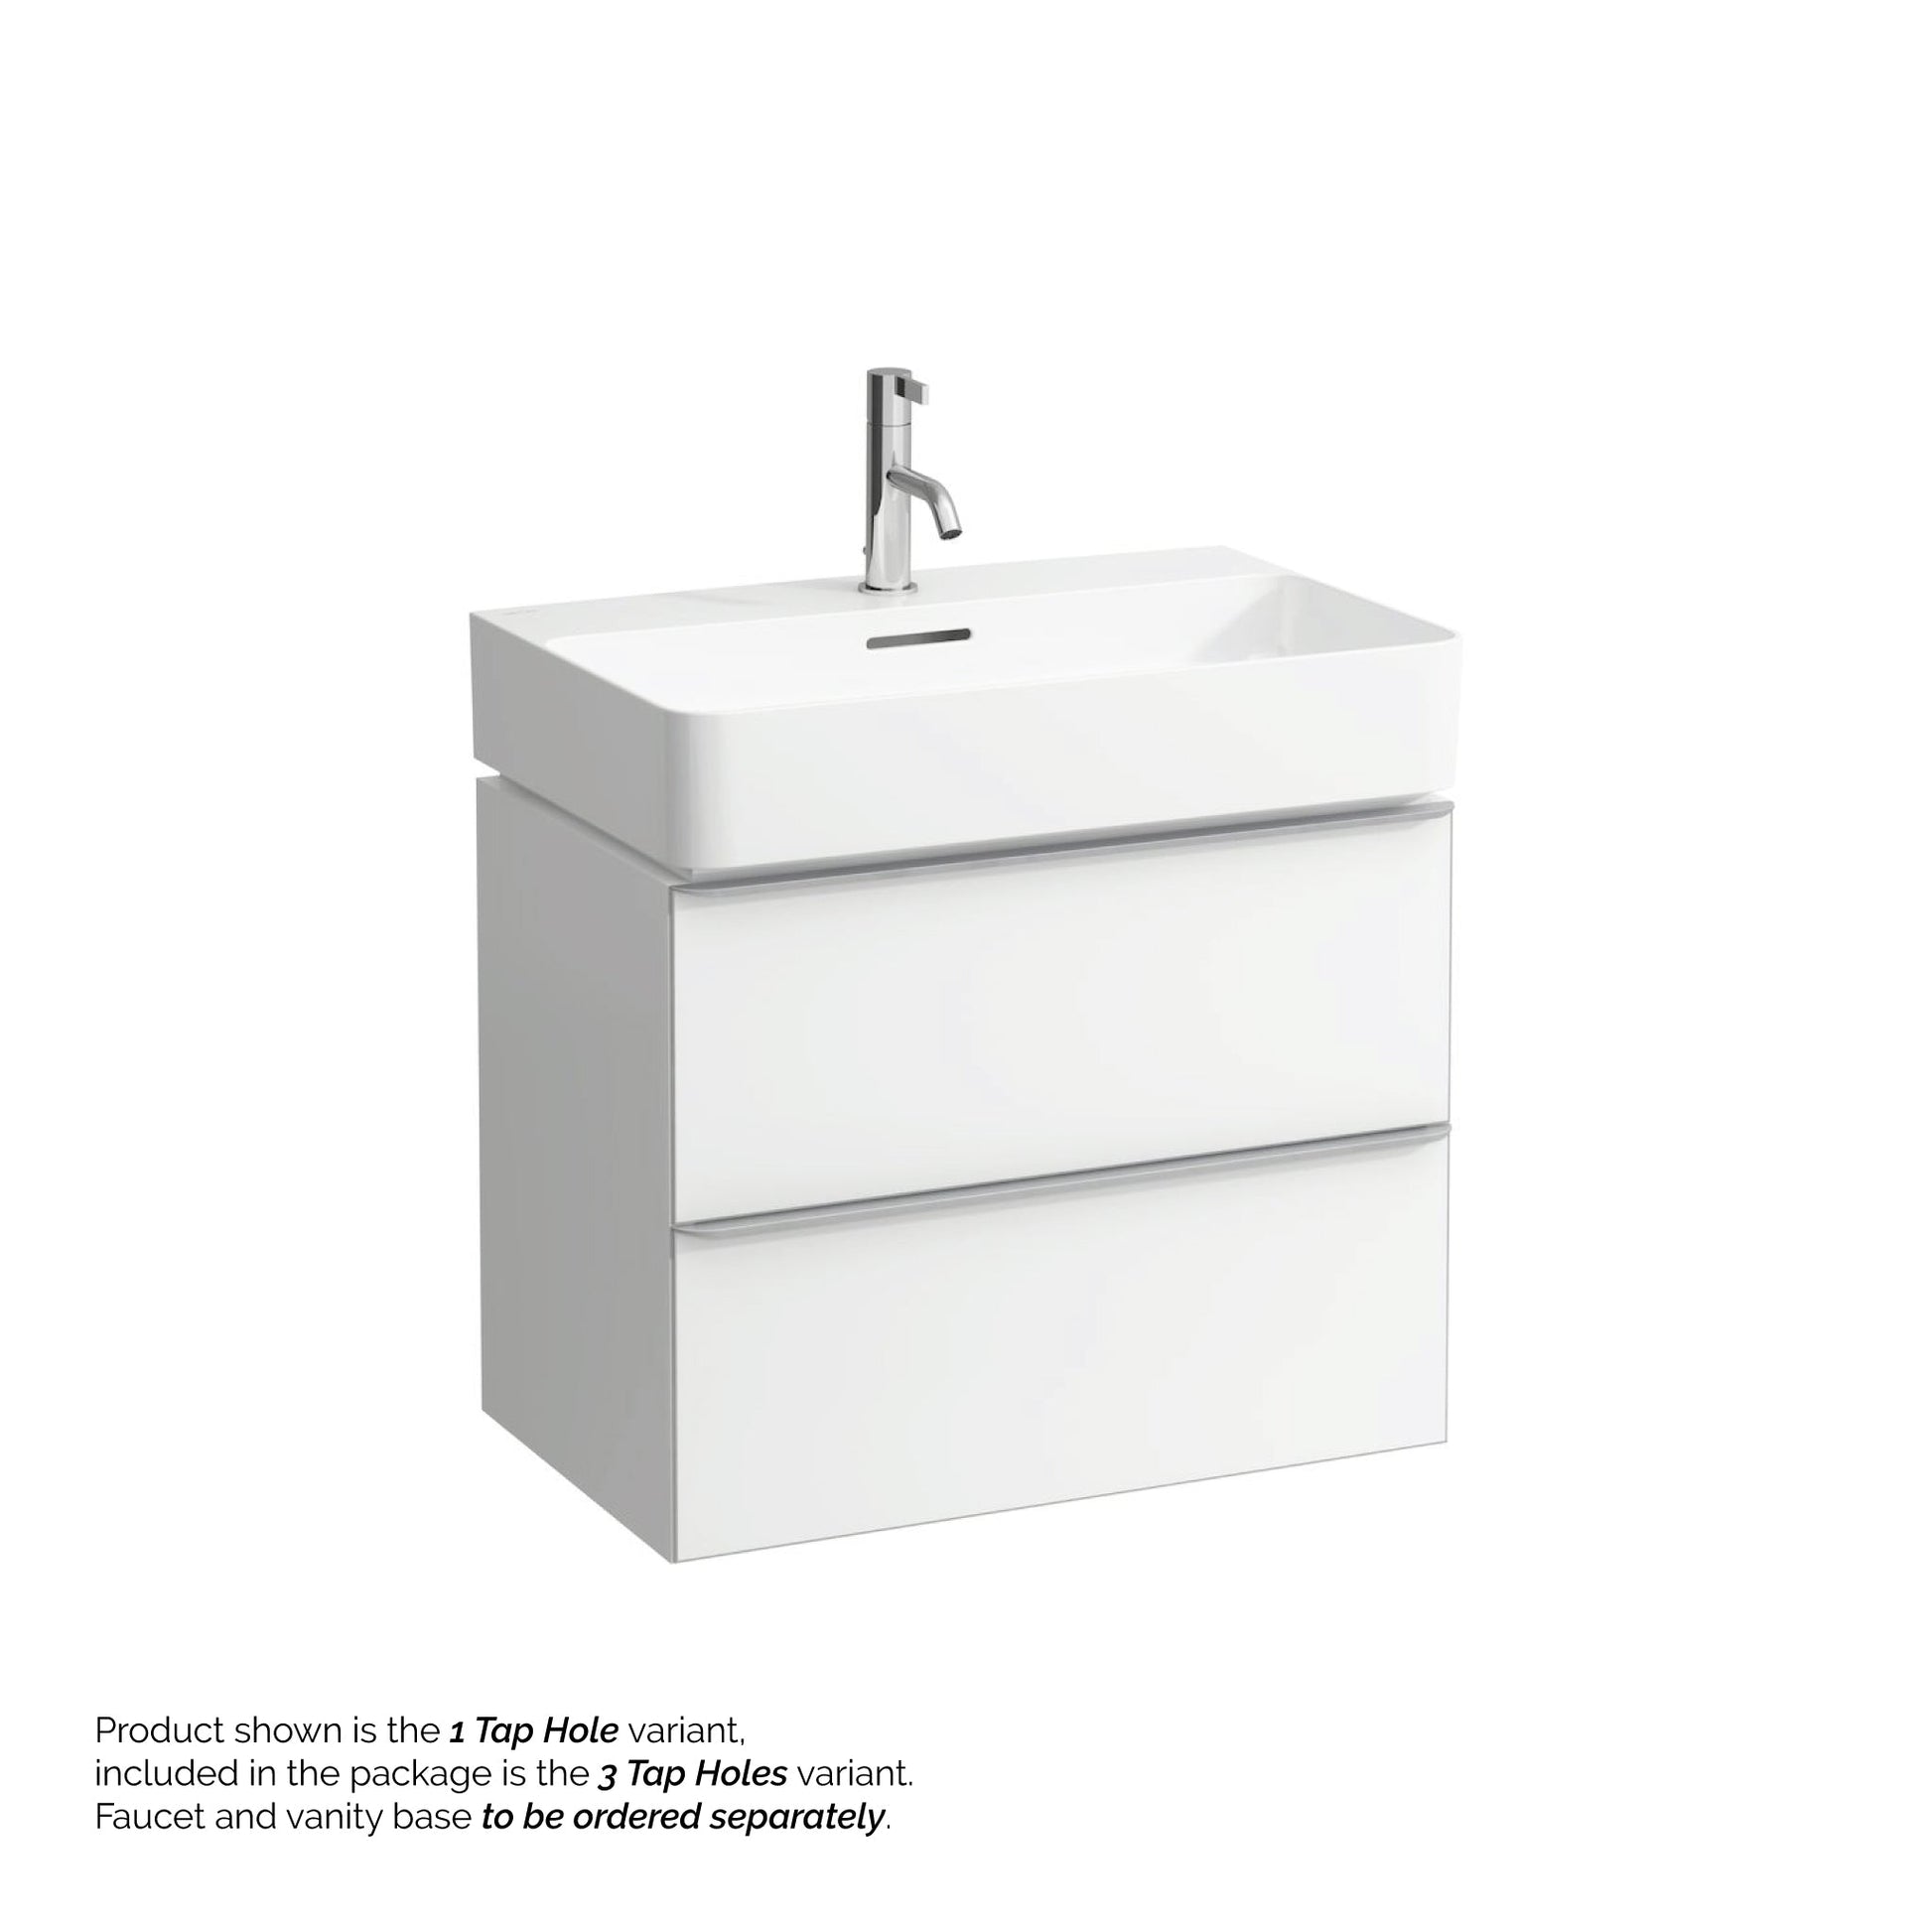 Laufen Val 26" x 17" White Ceramic Wall-Mounted Bathroom Sink With 3 Faucet Holes